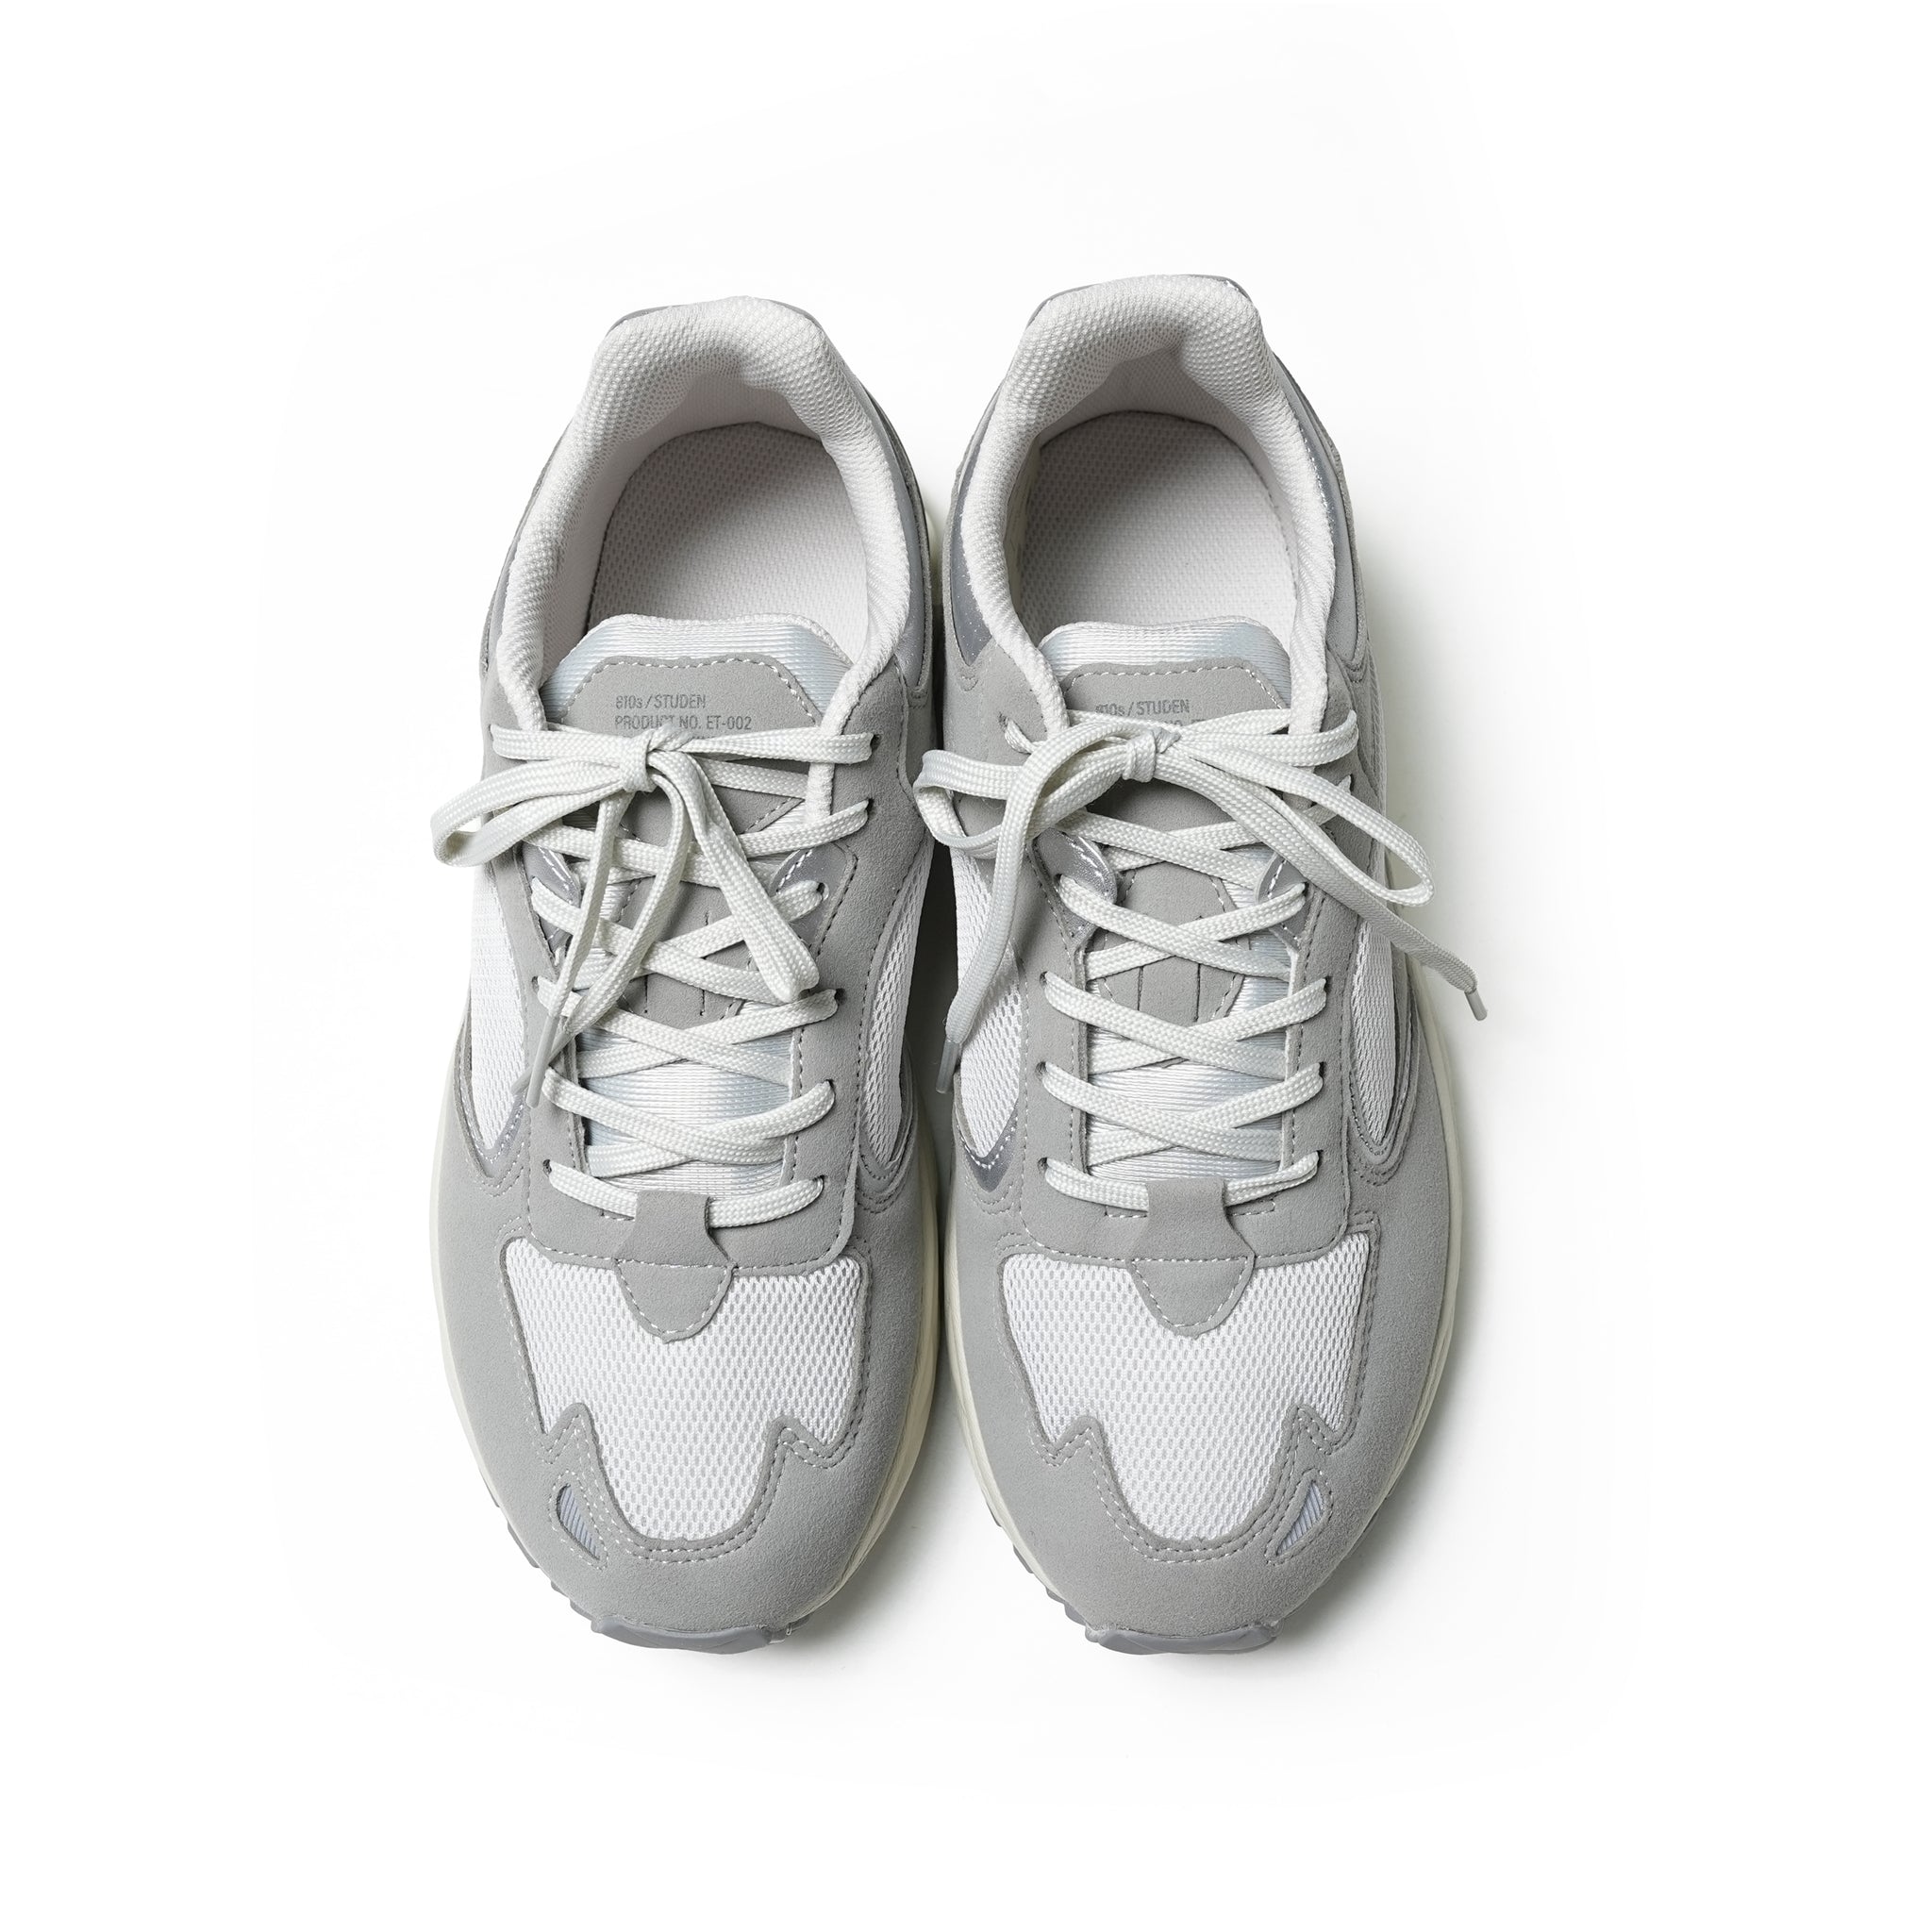 NO:ET002 | Name:STUDEN スチューデン | Color:Silver Gray【810S_ 